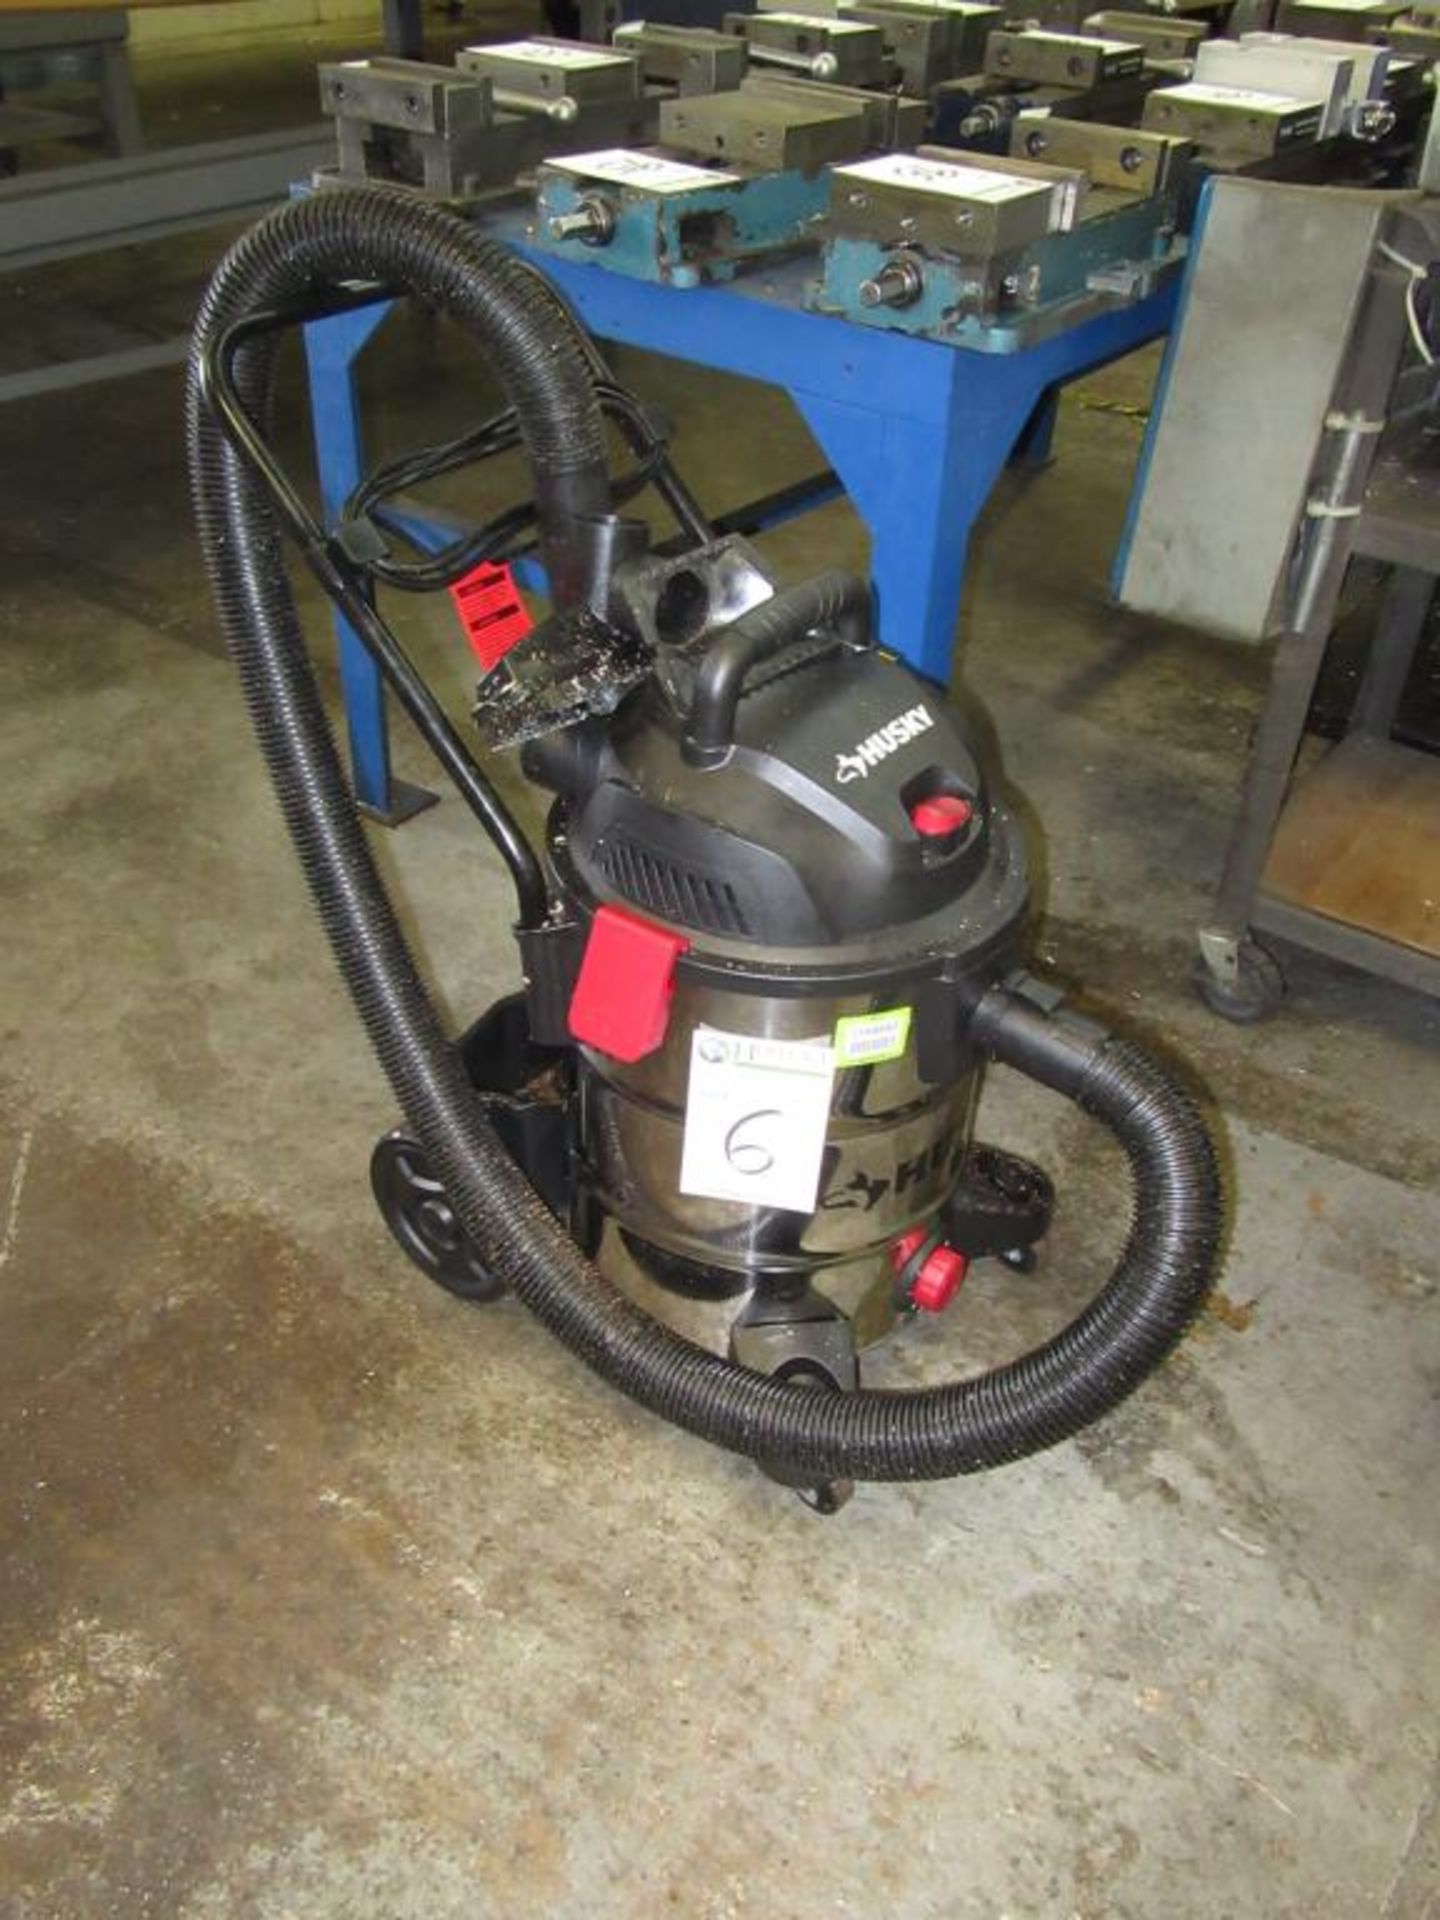 Husky 8111011 Wet/Dry Vacuum, 5 HP, 10 Gal/Cap. With Attachments. HIT# 2194893. Asset(s) Located